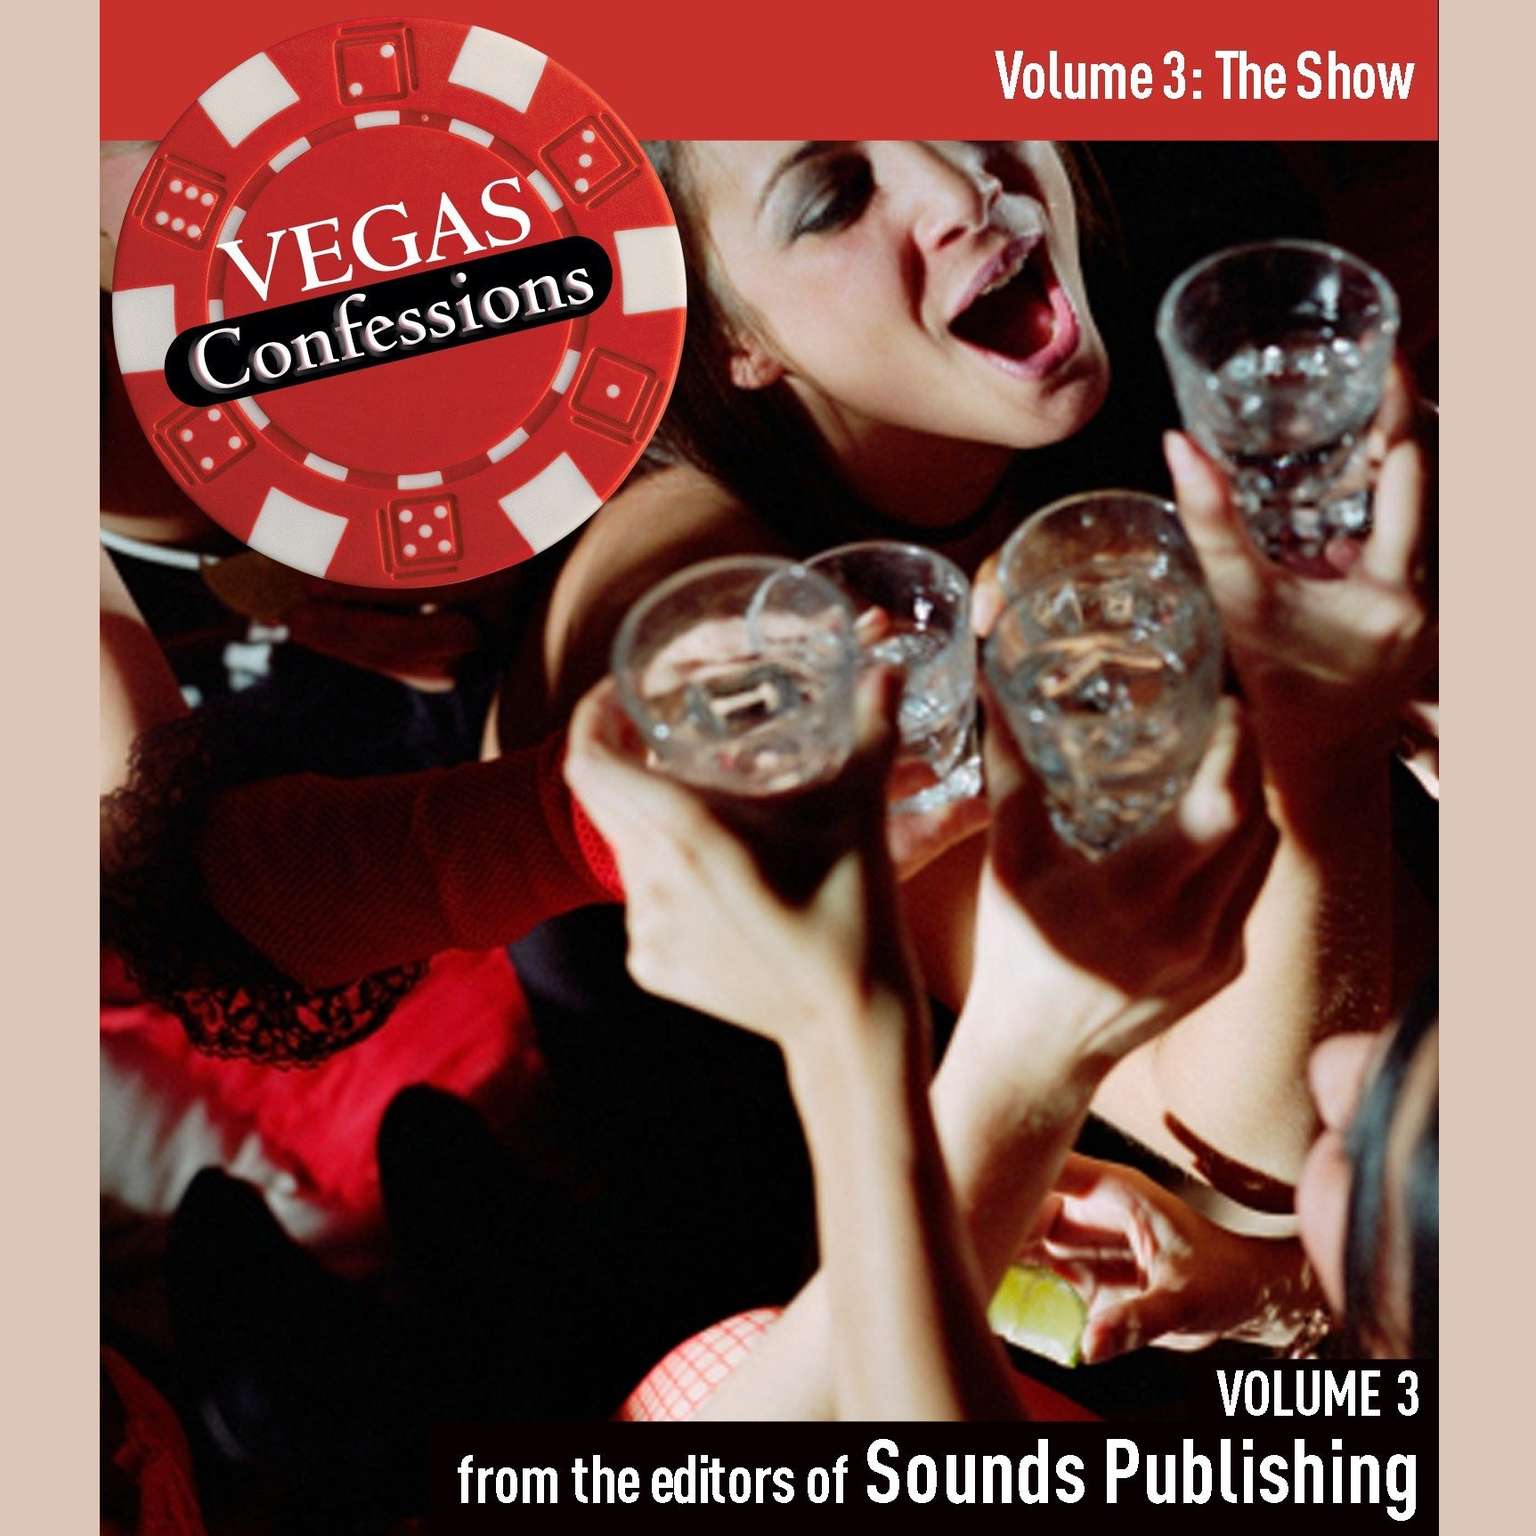 Vegas Confessions 3: The Show Audiobook, by The Editors of Sounds Publishing